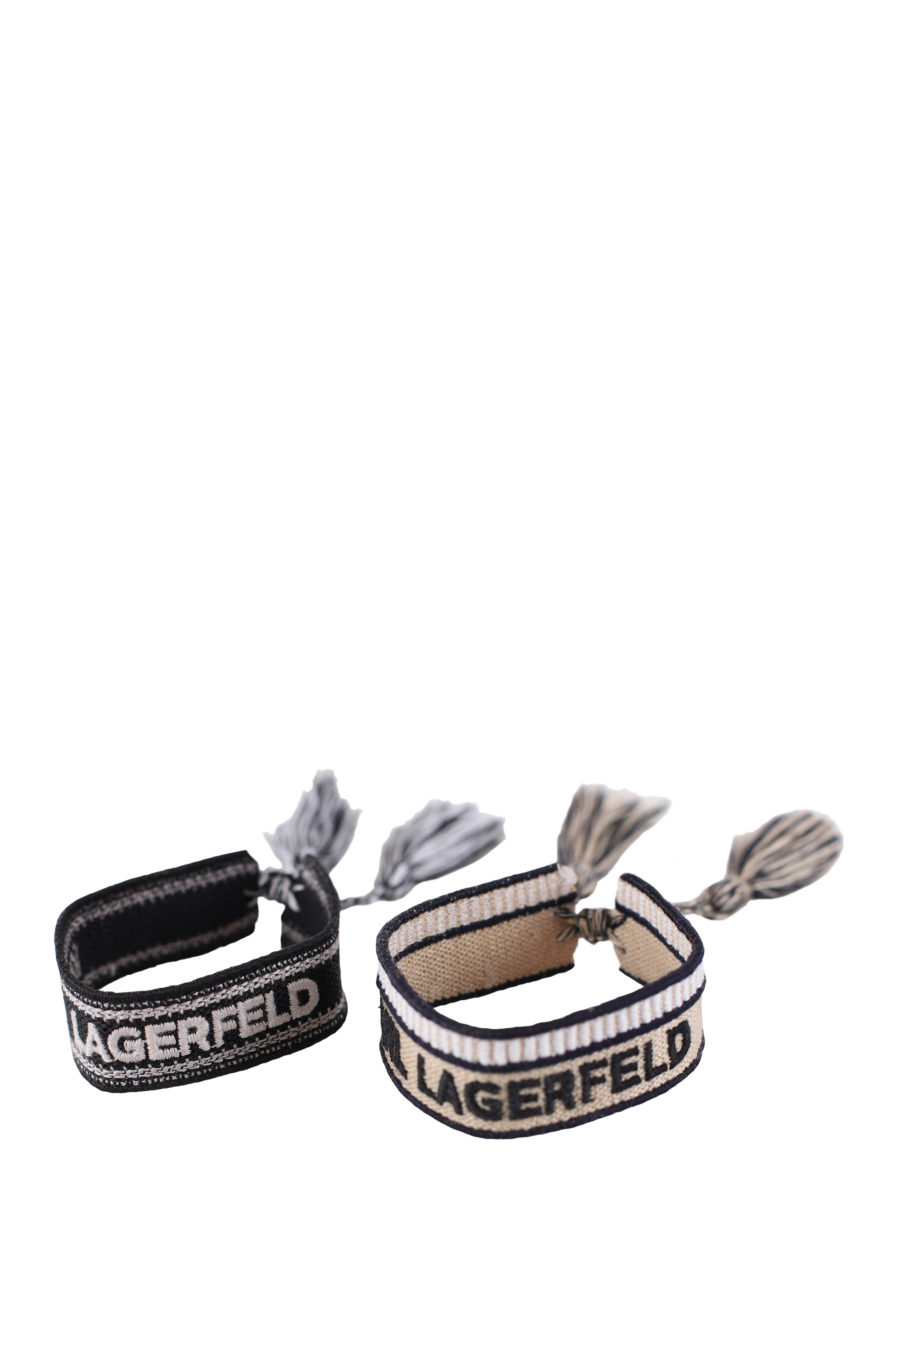 Set of two black and beige woven bracelets with logo - IMG 0304